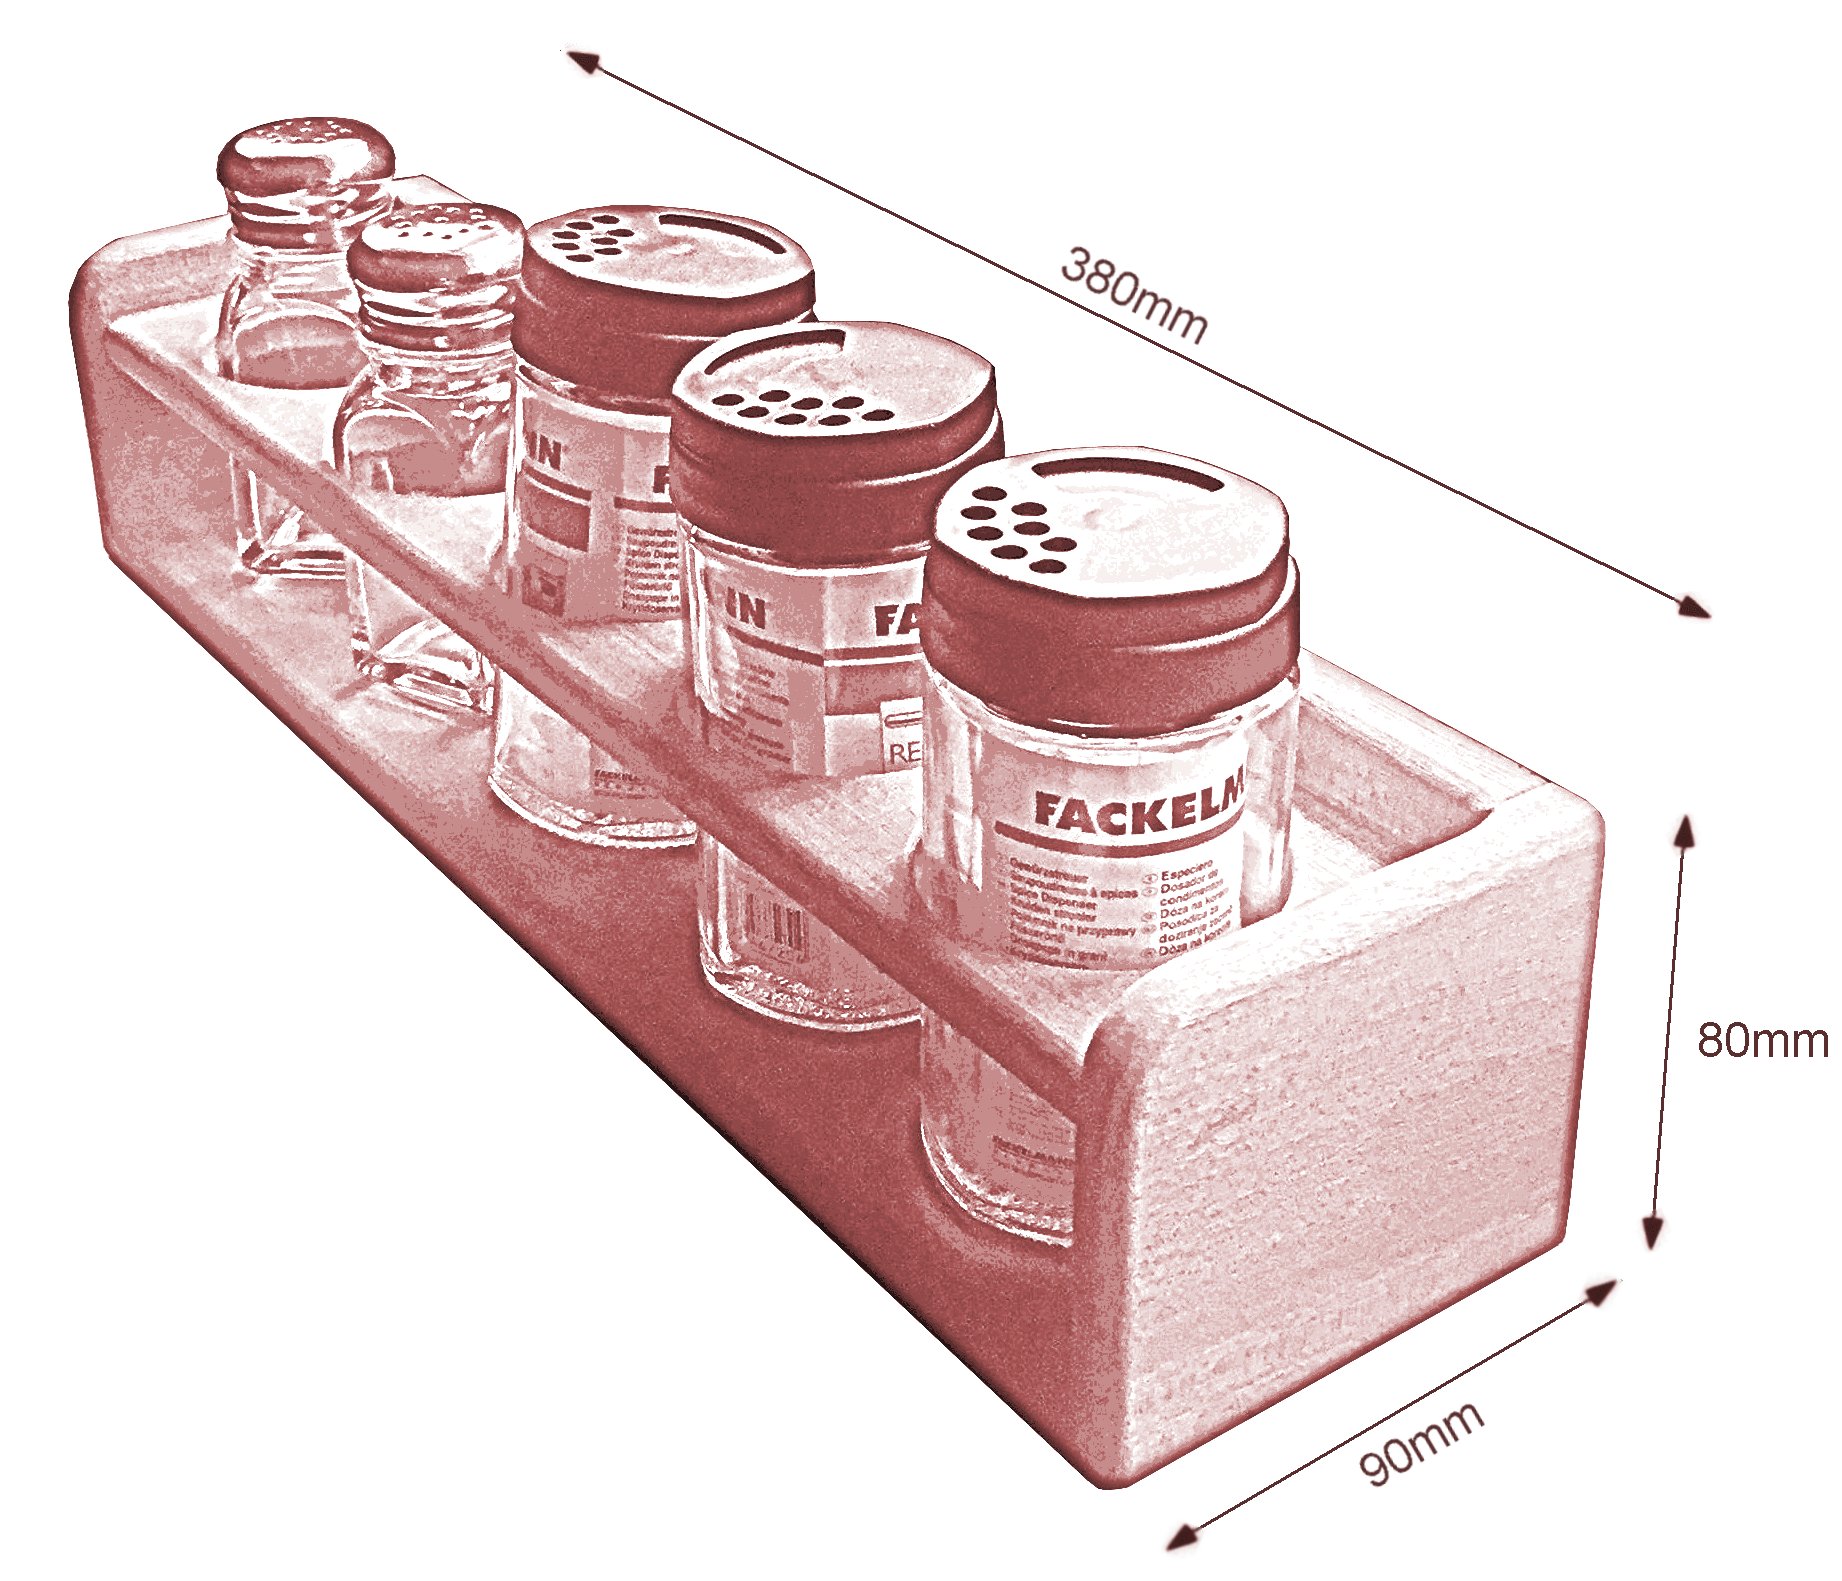 Sketch with measurements, spice rack